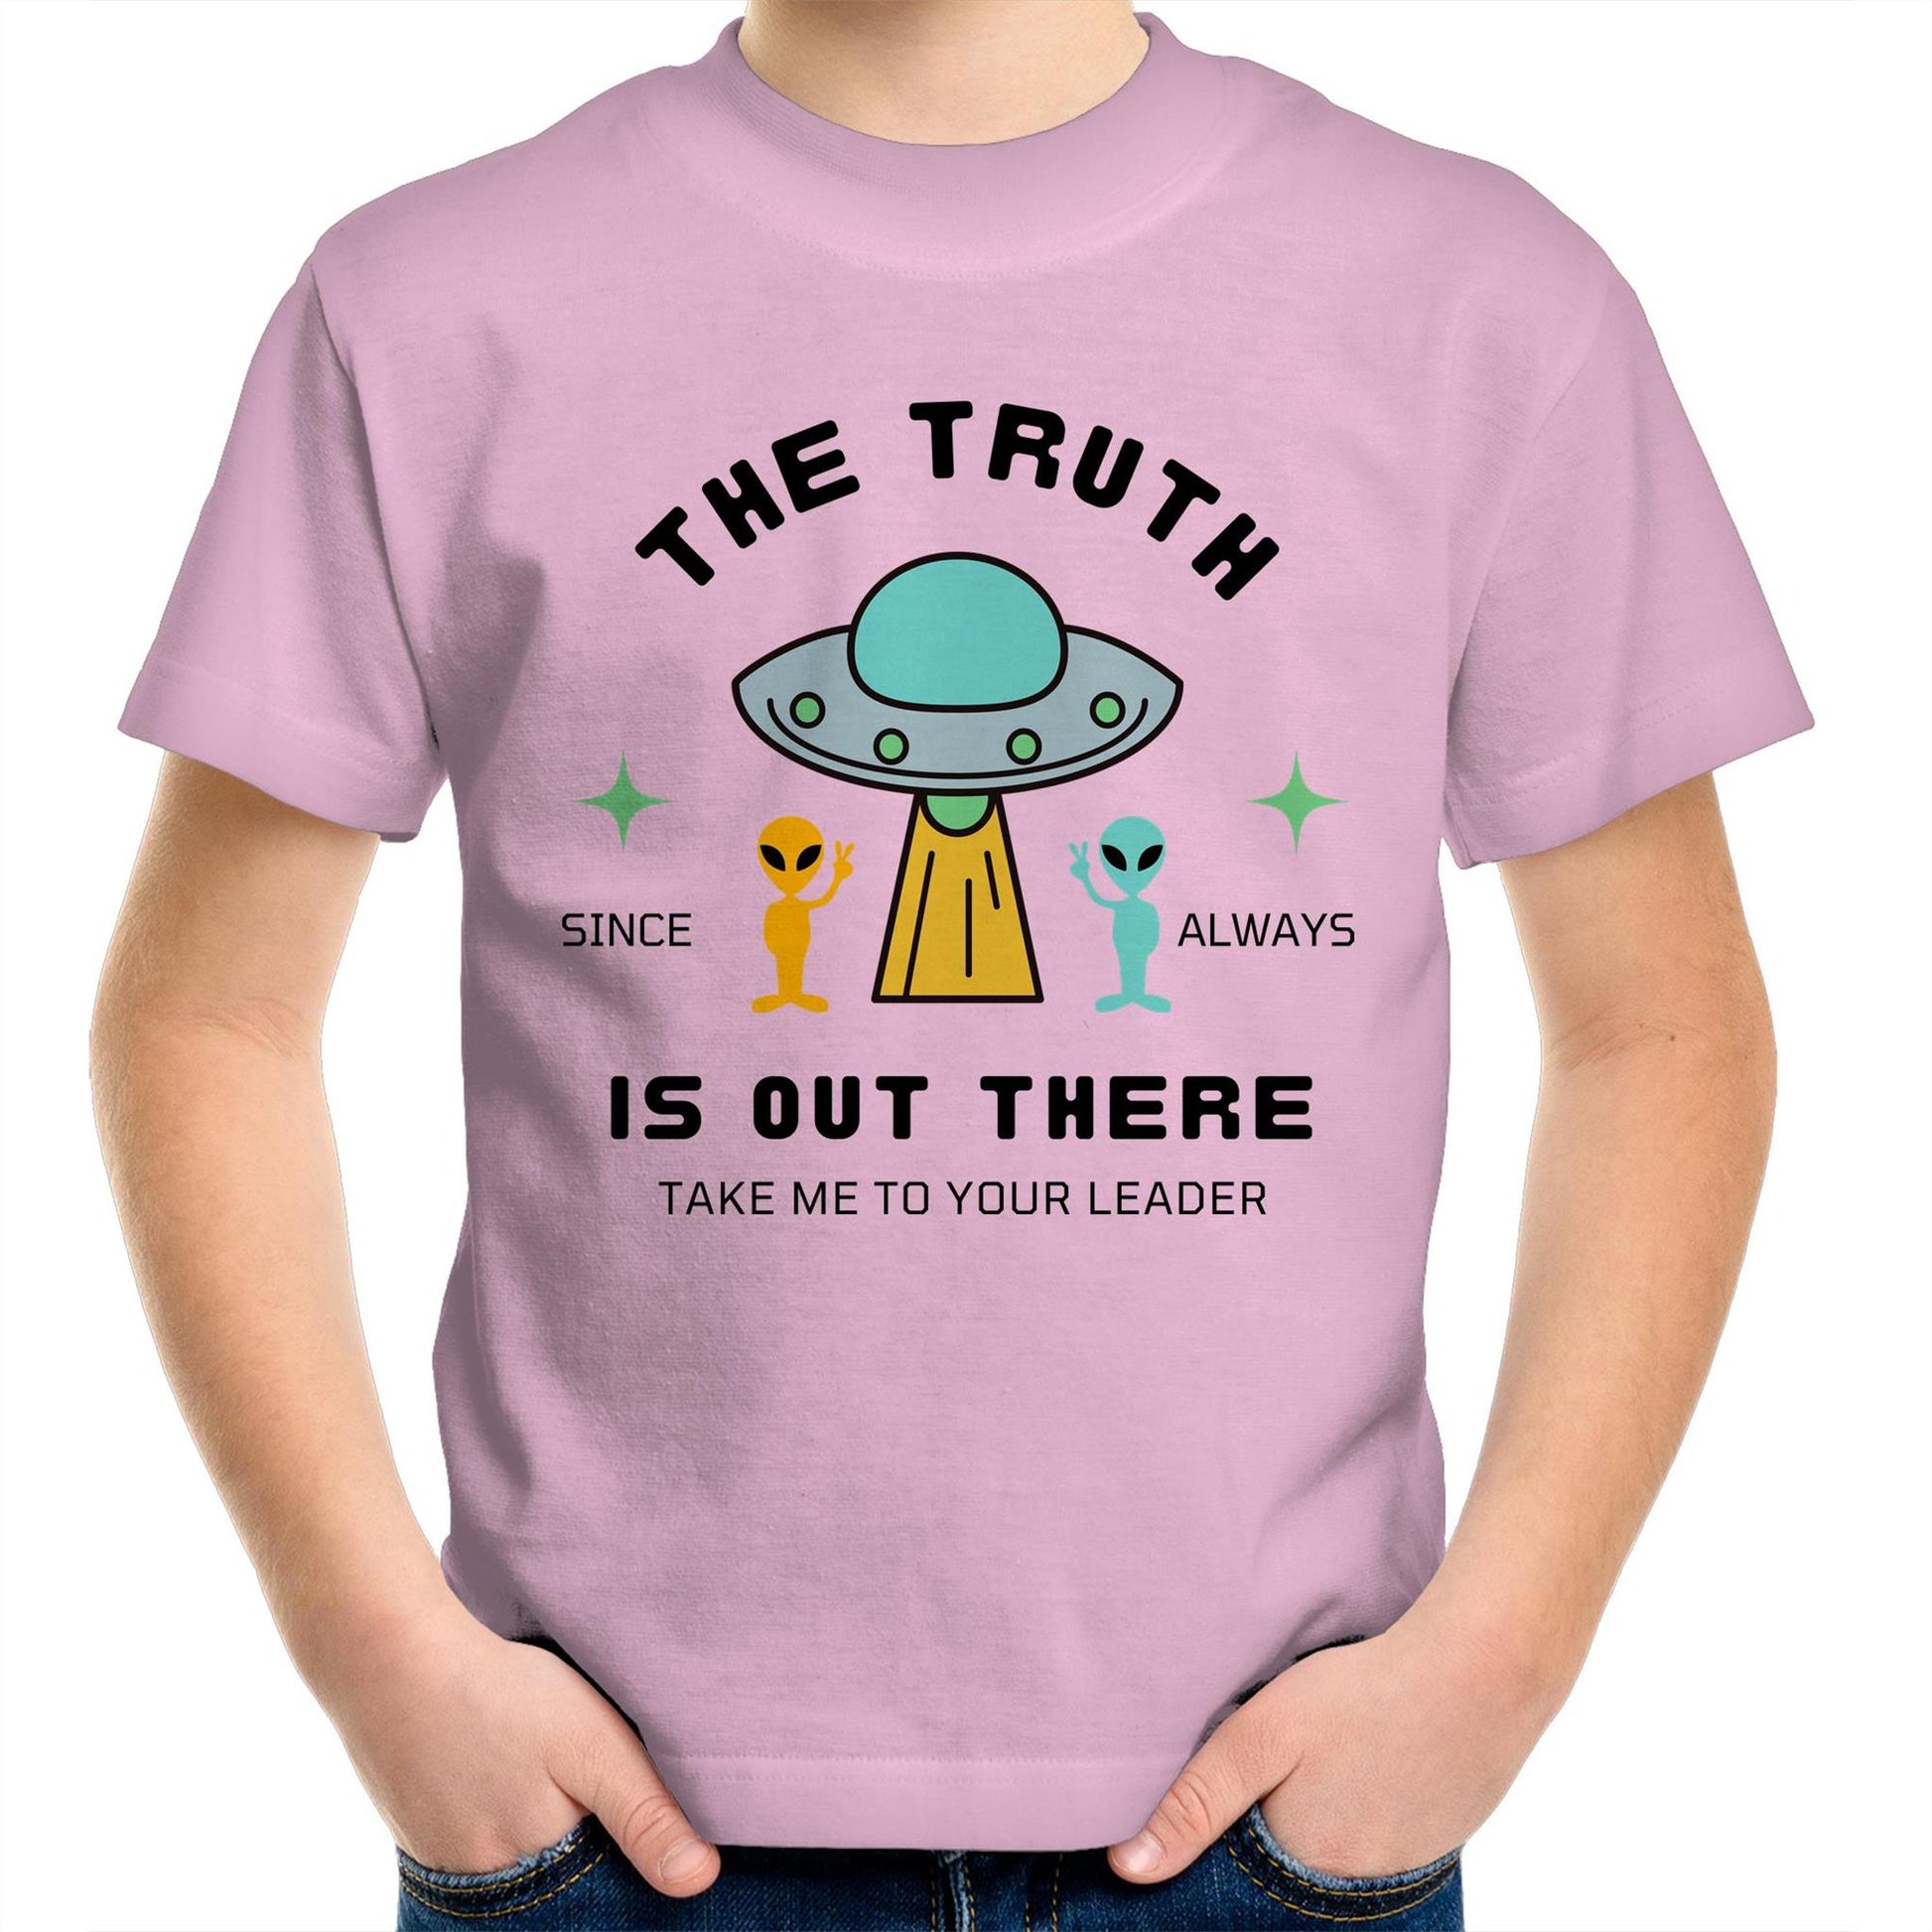 The Truth Is Out There - Kids Youth Crew T-Shirt Pink Kids Youth T-shirt Sci Fi